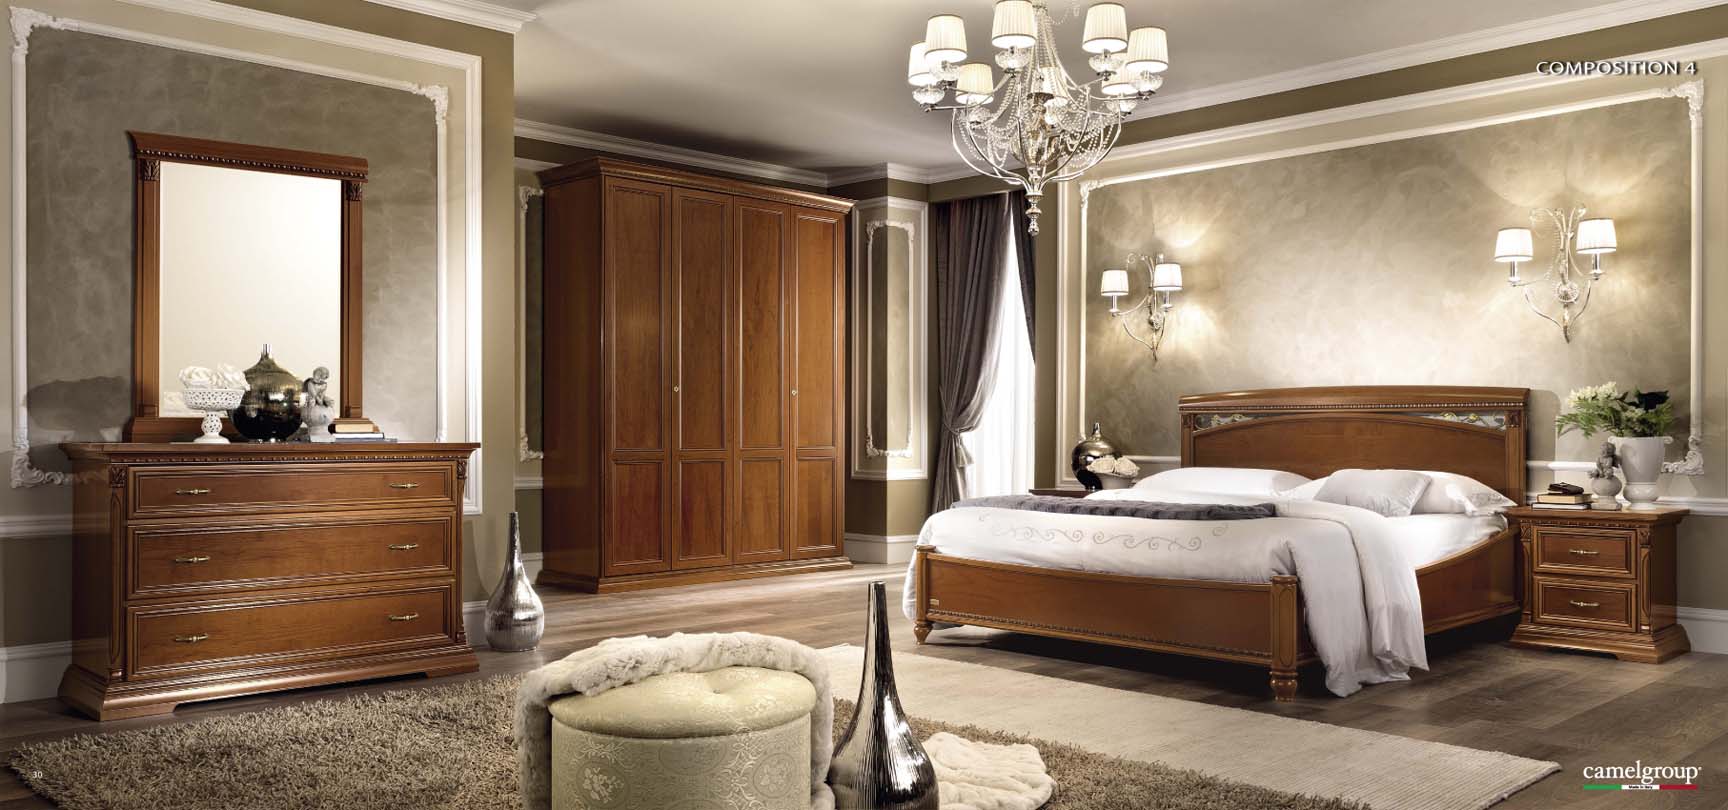 Bedroom Furniture Mirrors Treviso Night Composition 4 in Cherry